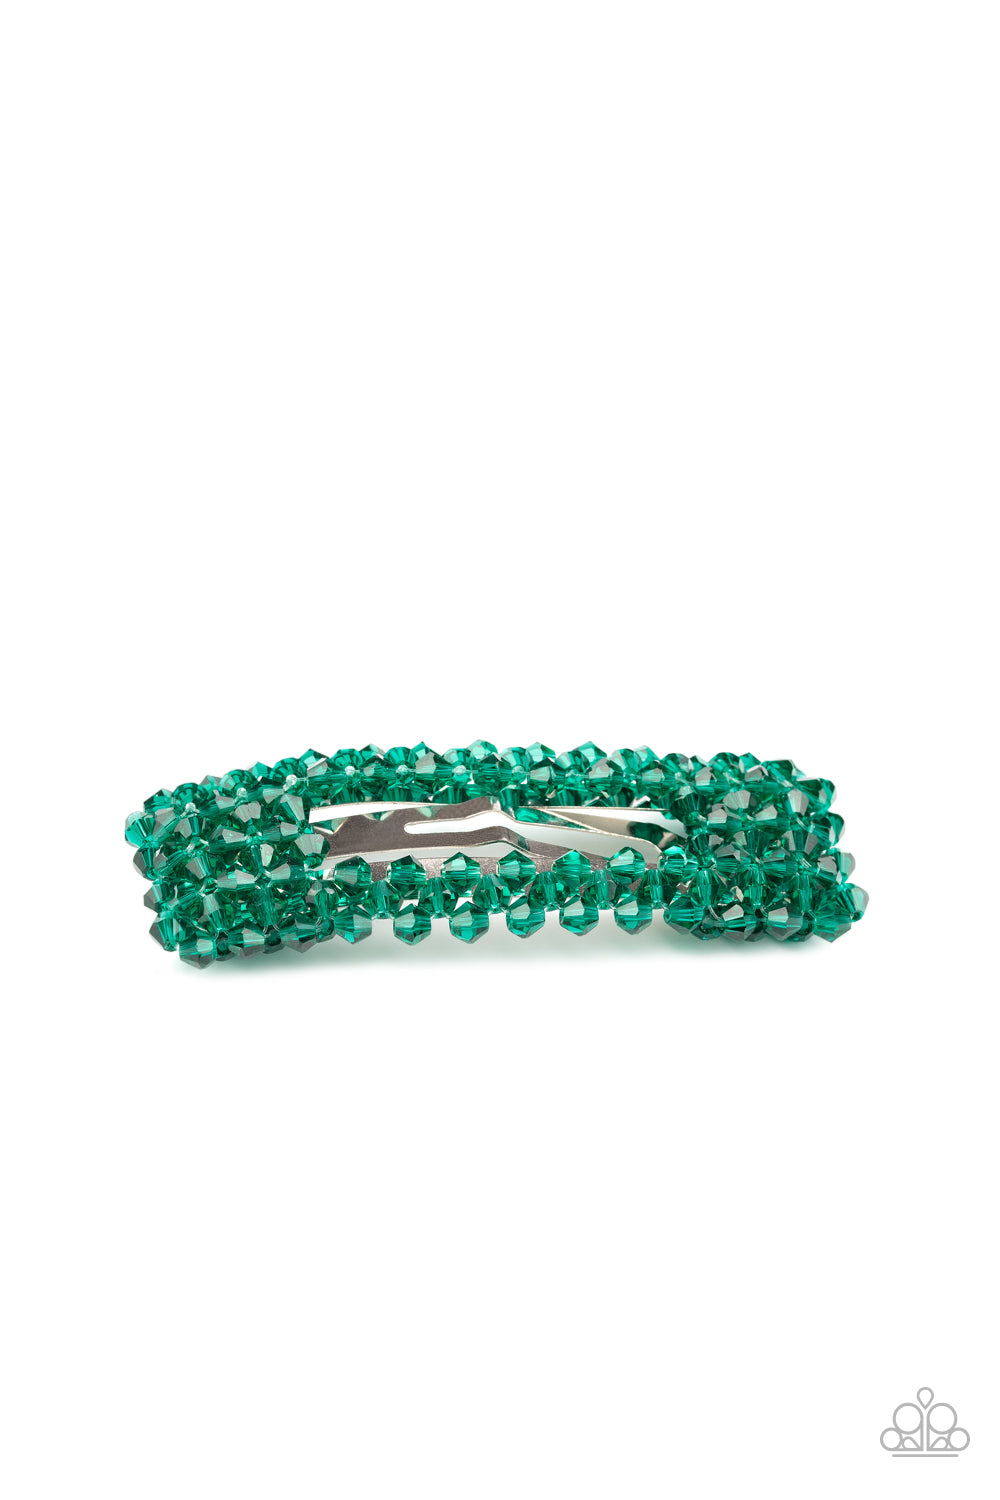 &lt;P&gt; Faceted green crystal-like beads bedazzle the front of a rectangular hair clip for a sparkly finish. Features a standard snap clip on the back.&lt;/P&gt;

&lt;P&gt;&lt;I&gt;Sold as one individual hair clip.&lt;/I&gt;&lt;/P&gt;


&lt;img src=\&quot;https://d9b54x484lq62.cloudfront.net/paparazzi/shopping/images/517_tag150x115_1.png\&quot; alt=\&quot;New Kit\&quot; align=\&quot;middle\&quot; height=\&quot;50\&quot; width=\&quot;50\&quot;/&gt;